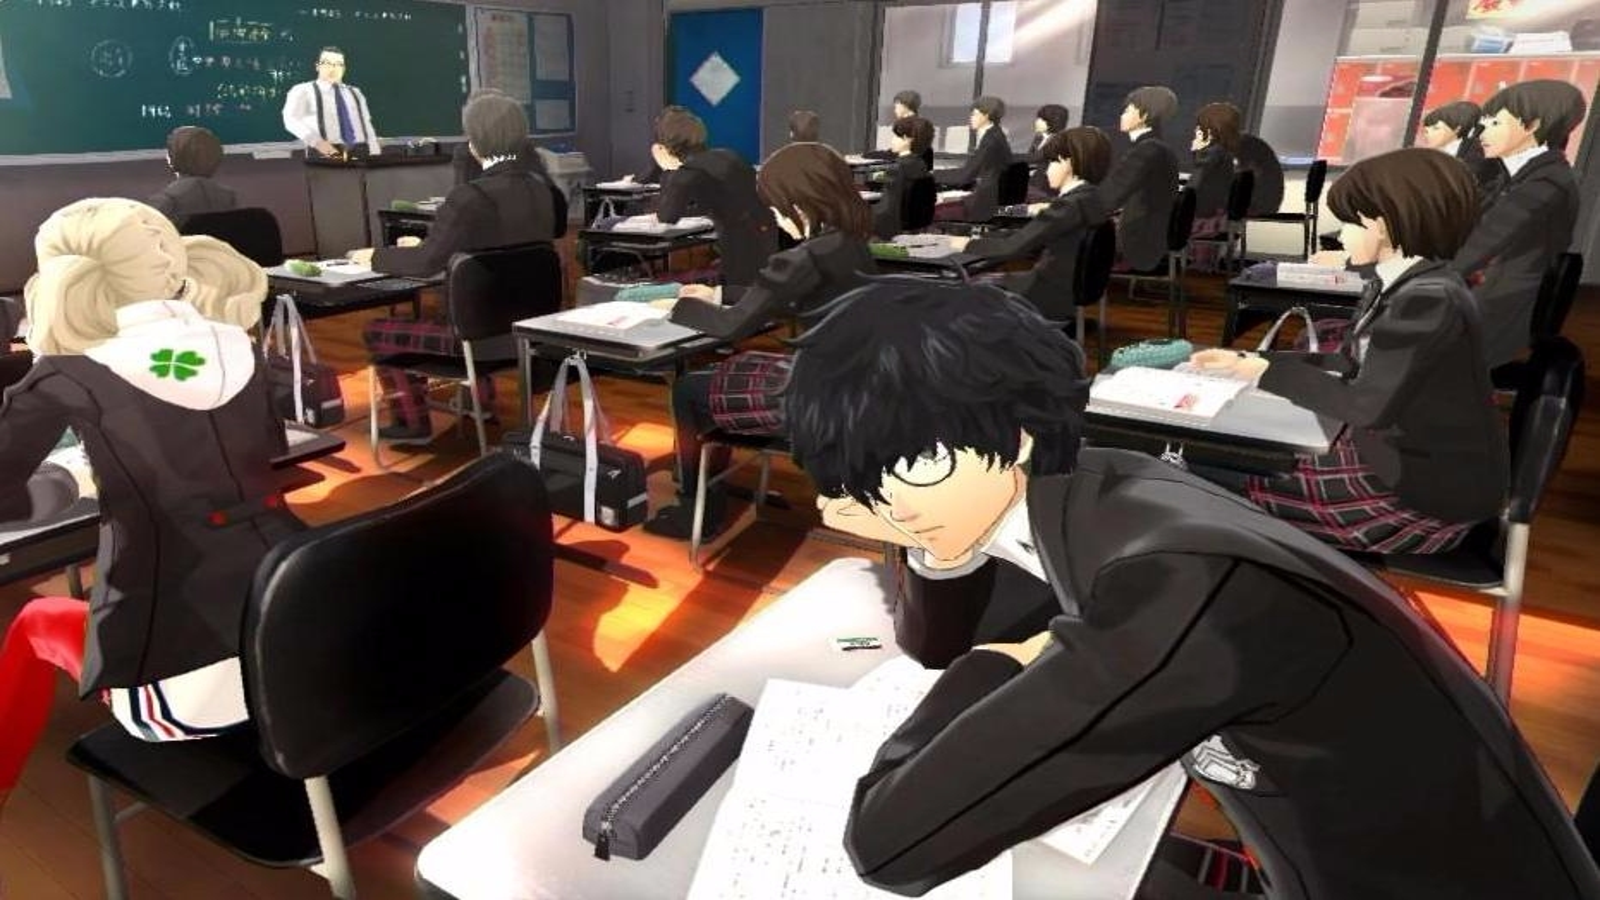 Test Answers For Persona 5 Royal and Persona 5